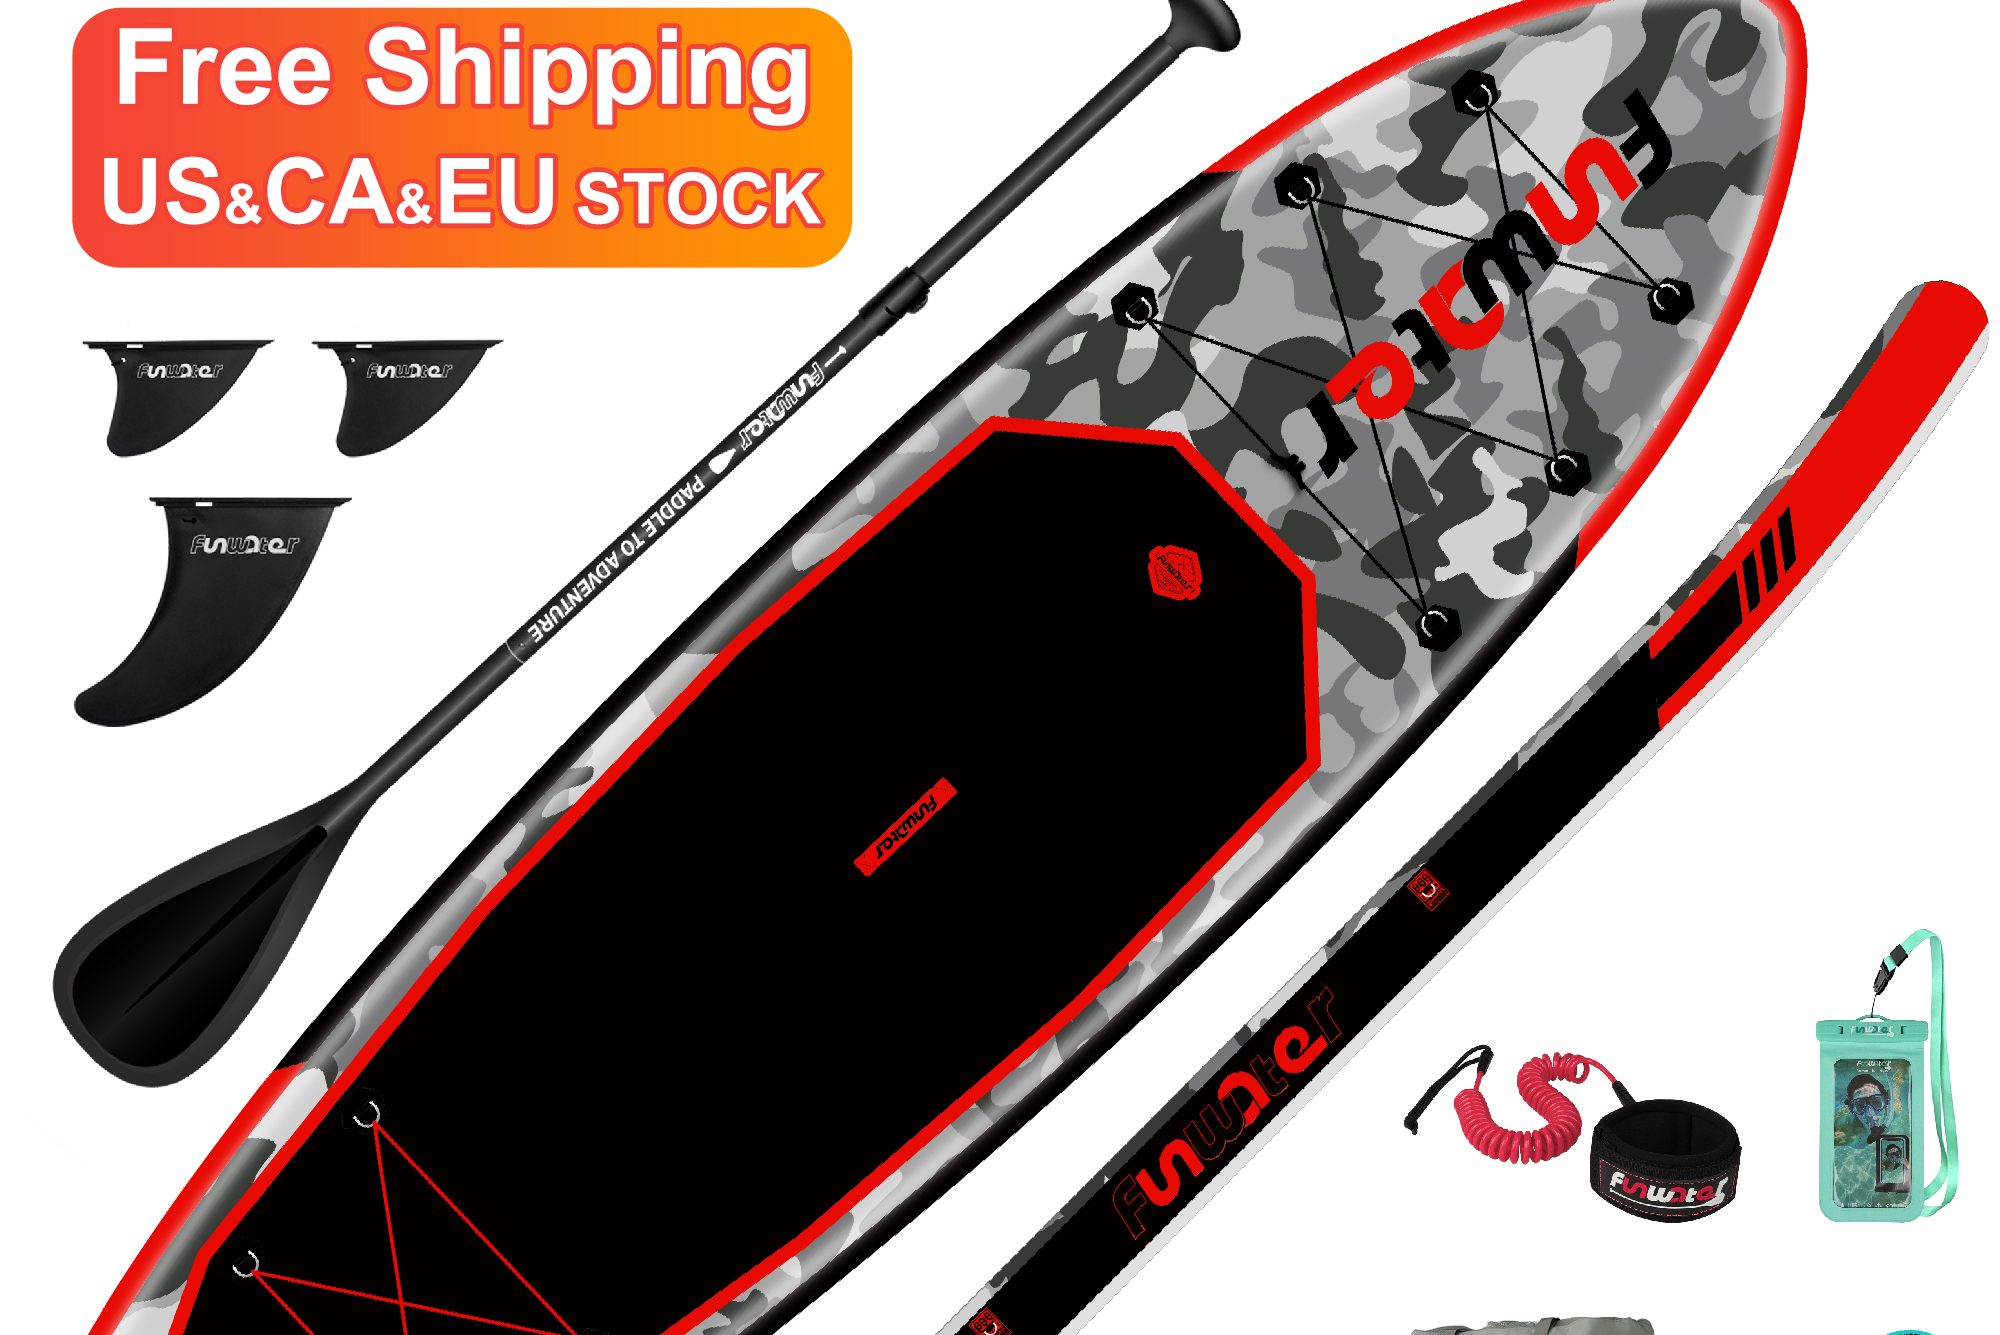 FunWater Aufblasbares Stand Up Paddleboard